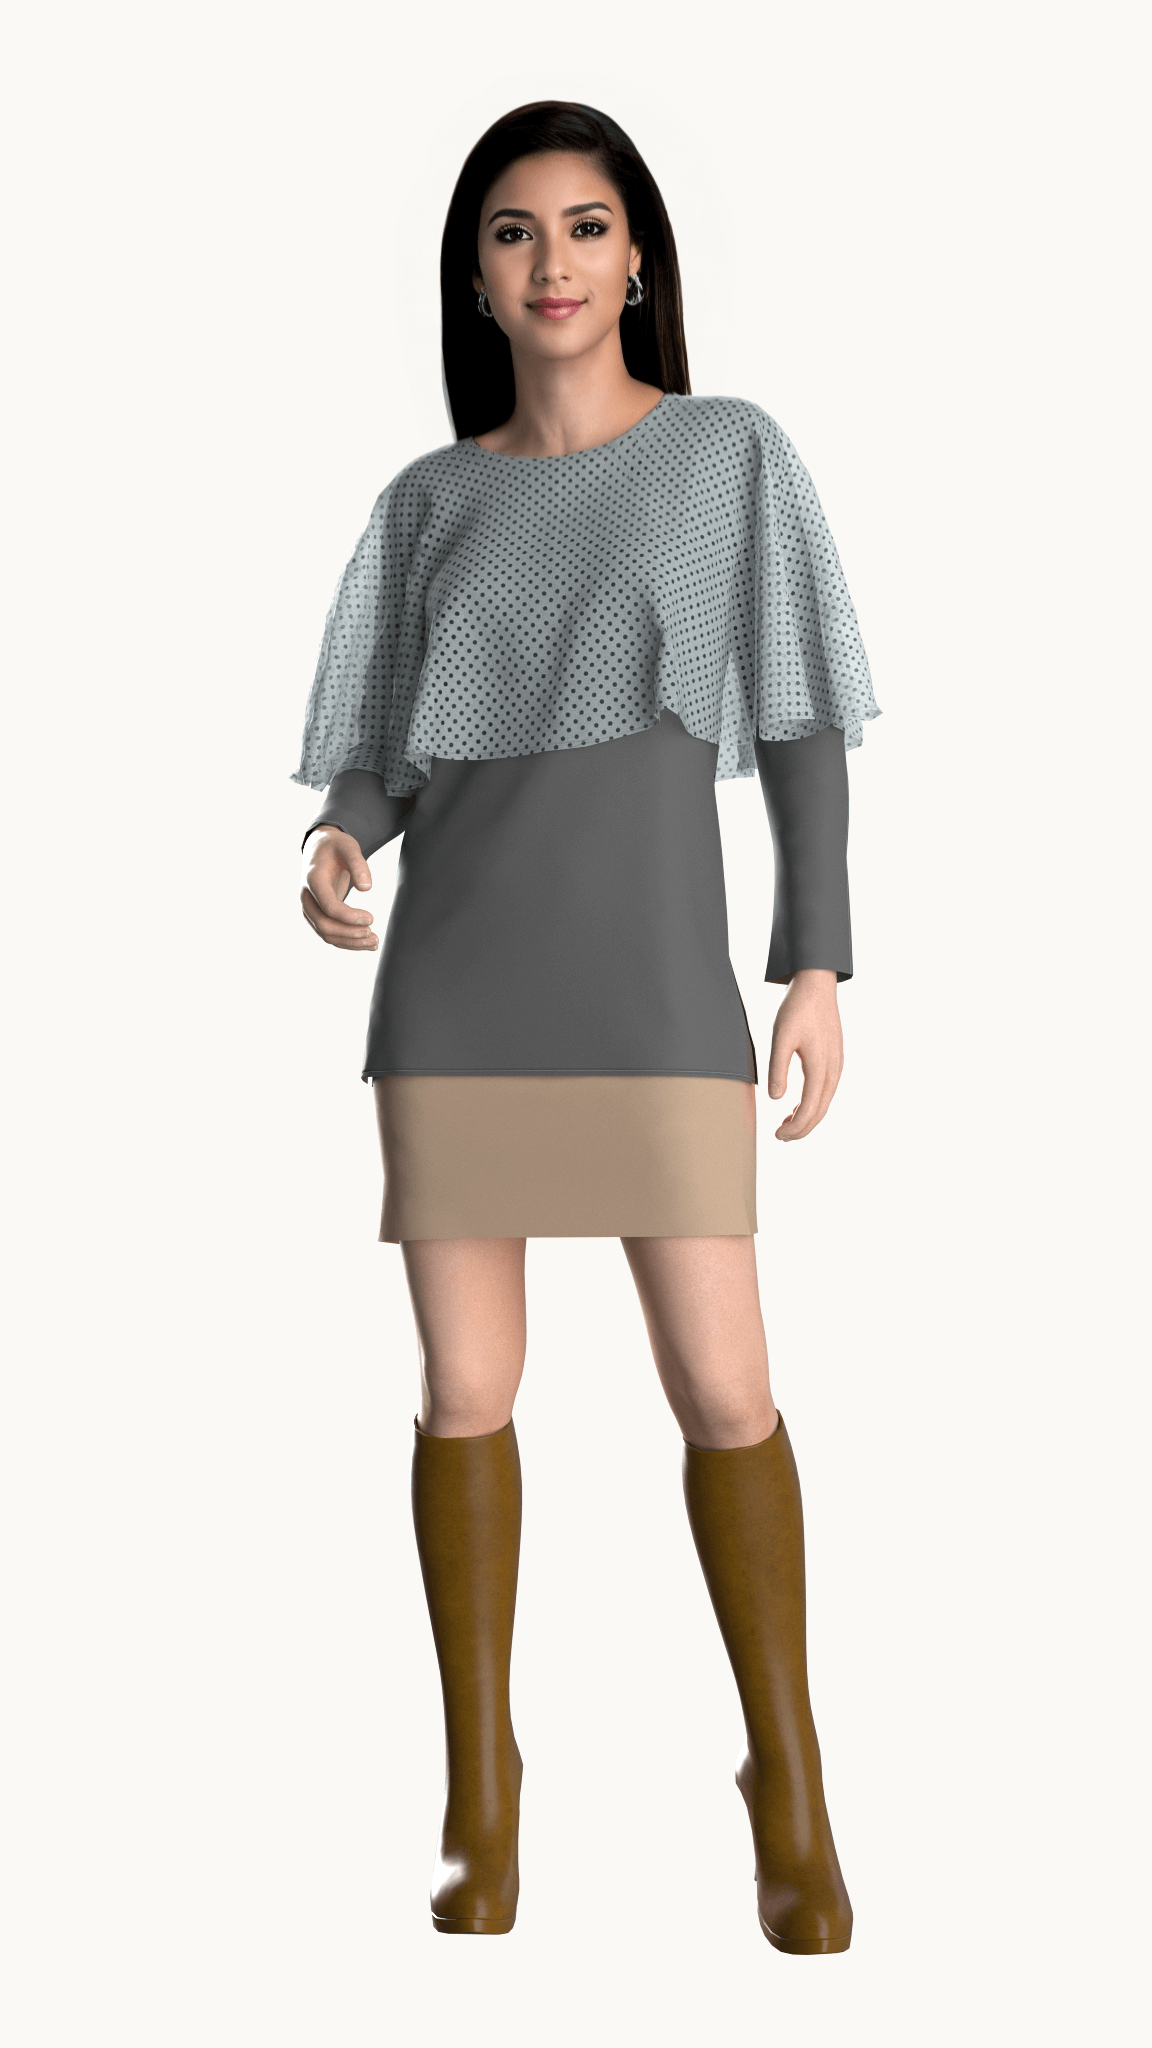 Experience casual elegance with this stunning Poncho-style layered top. The beautiful full sleeve silhouette is designed to flatter any figure, providing year-round versatility. Perfect for cold-weather chic, this elegant piece is sure to become a wardrobe favorite.